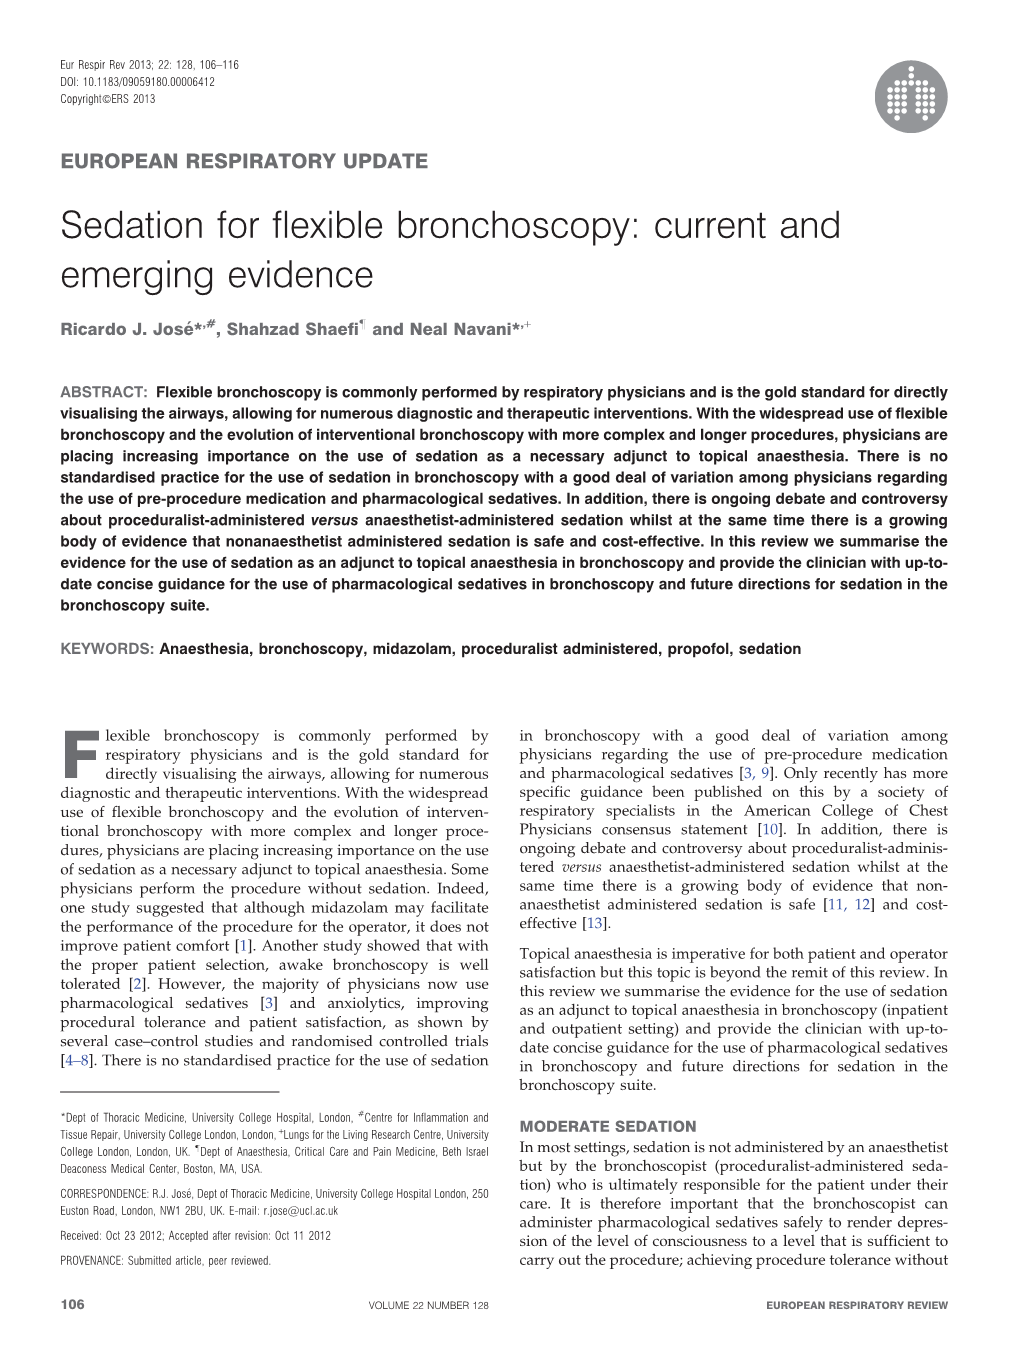 Sedation for Flexible Bronchoscopy: Current and Emerging Evidence